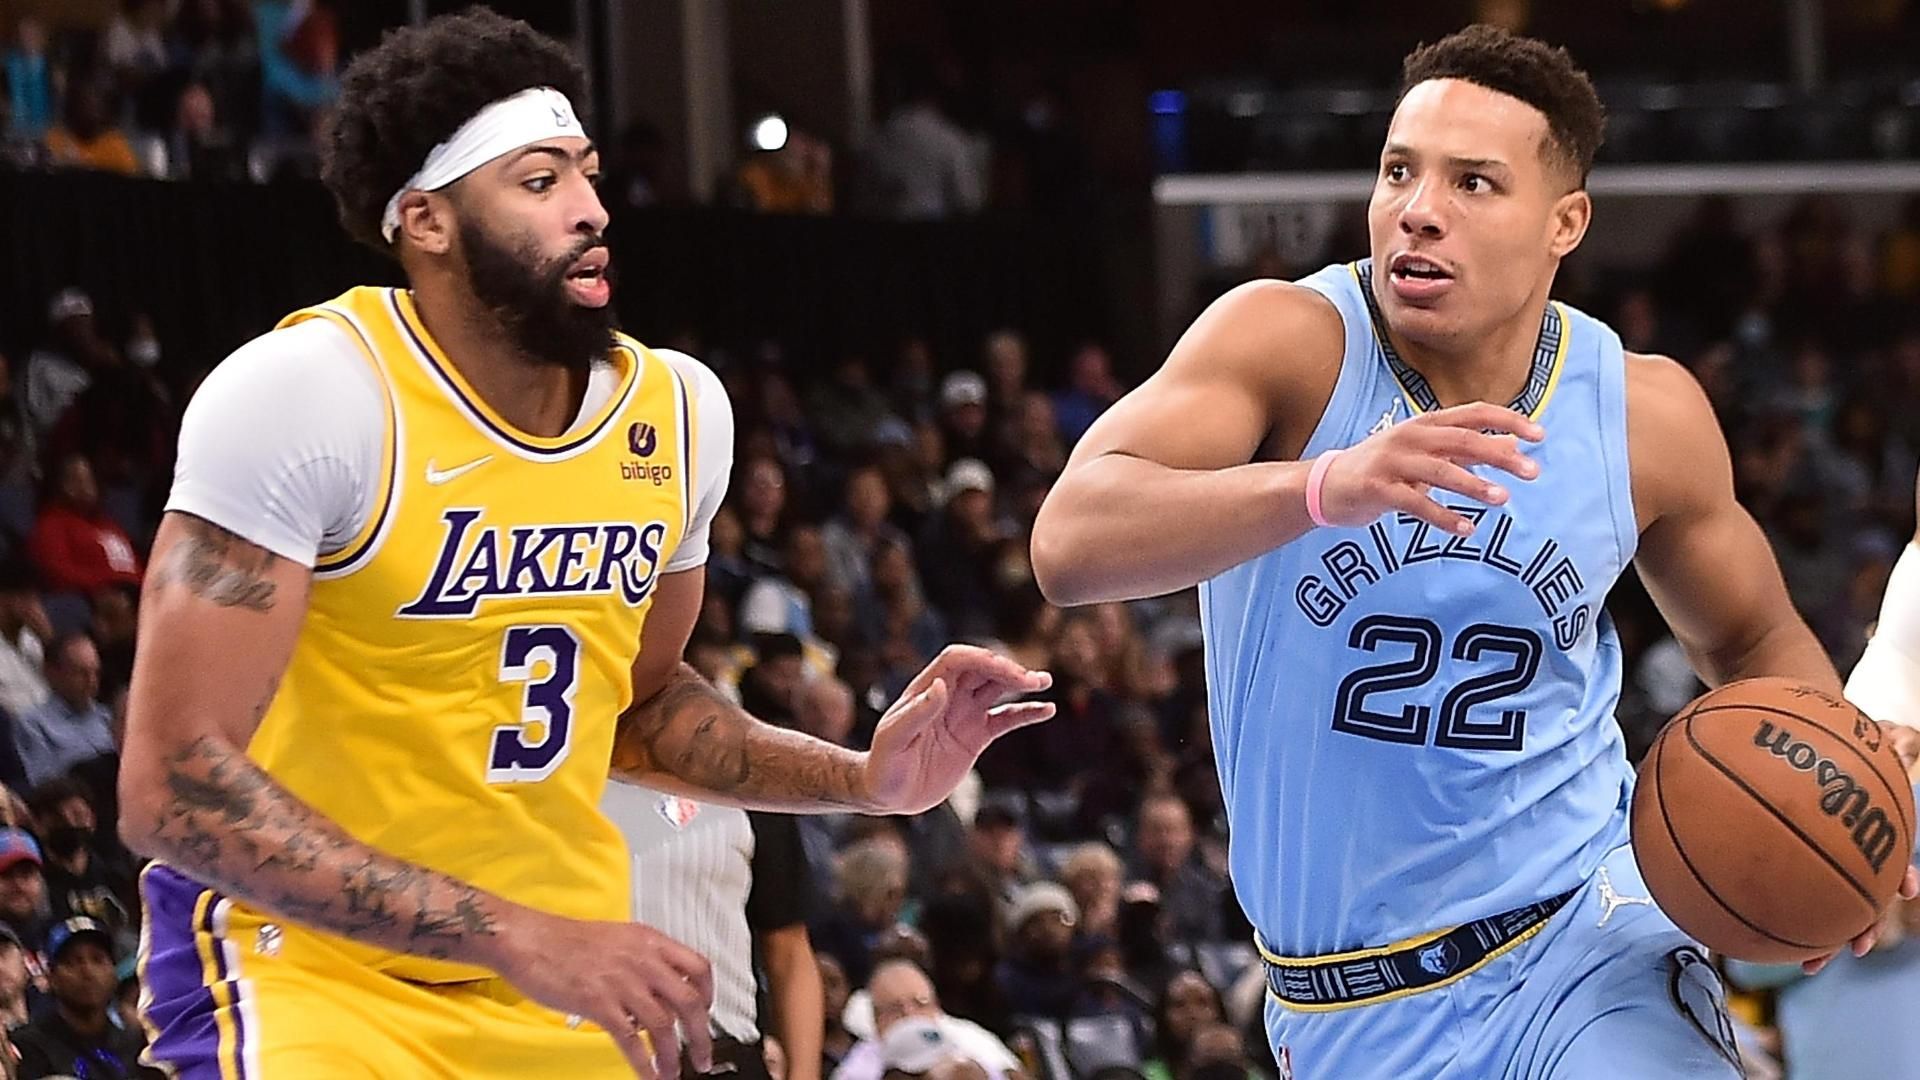 Los Angeles Lakers’ Anthony Davis says team needs to play like ‘underdogs’ after loss to Grizzlies – ESPN